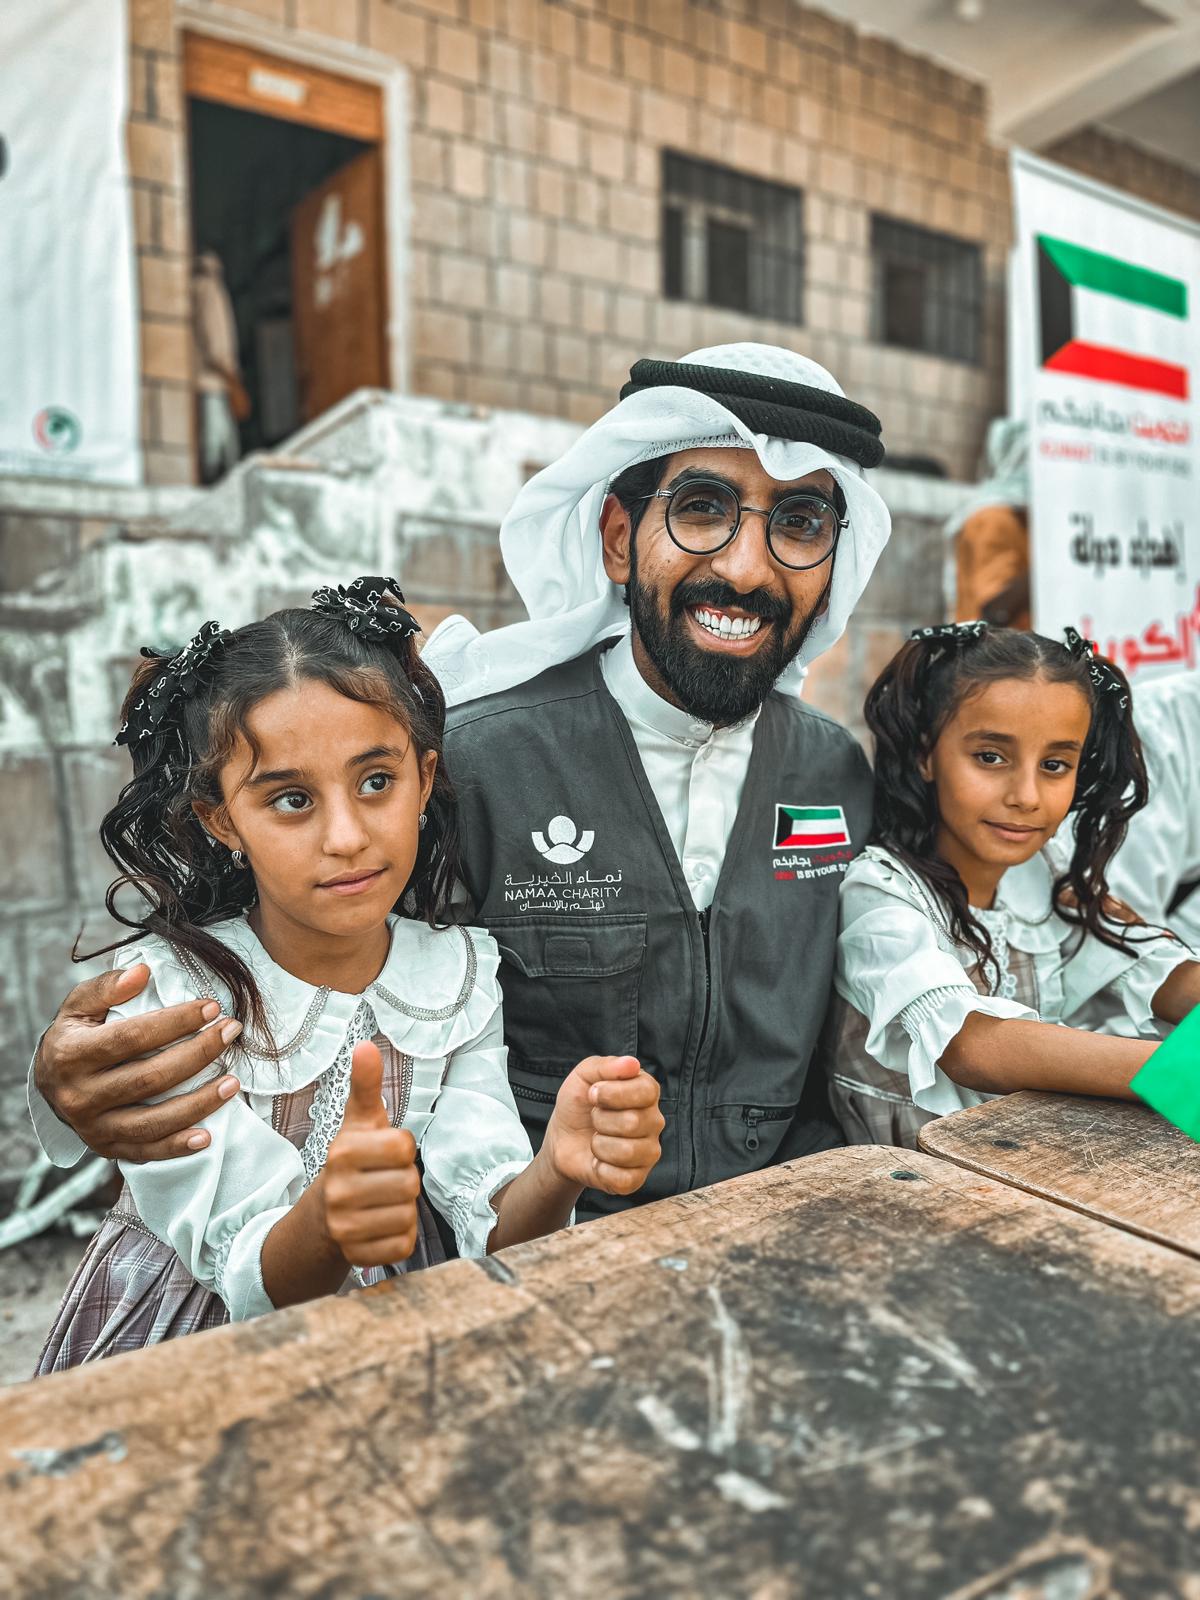 Kuwait's charitable Namaa institution launches a relief program in Yemen